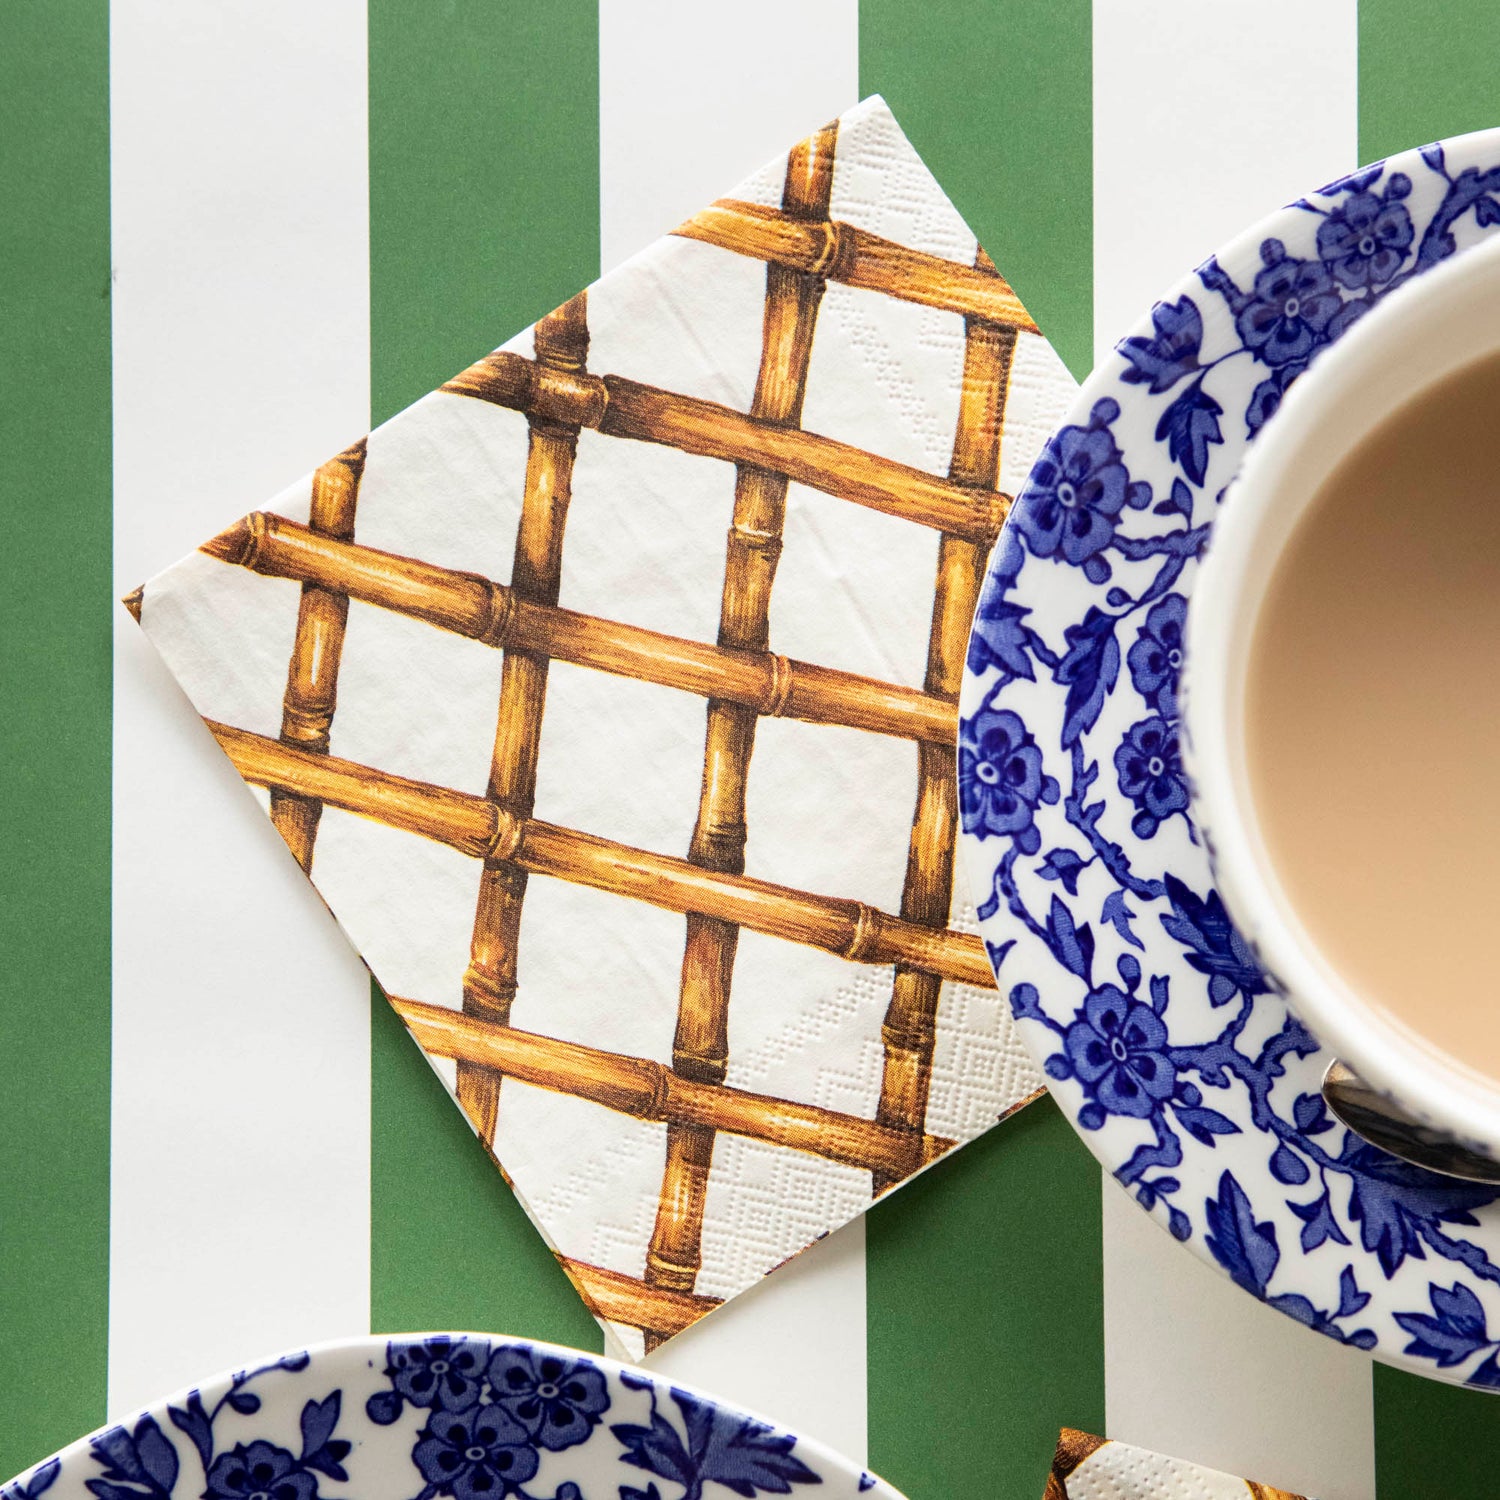 A Bamboo Lattice Cocktail Napkin on a striped table runner next to a cup of coffee.